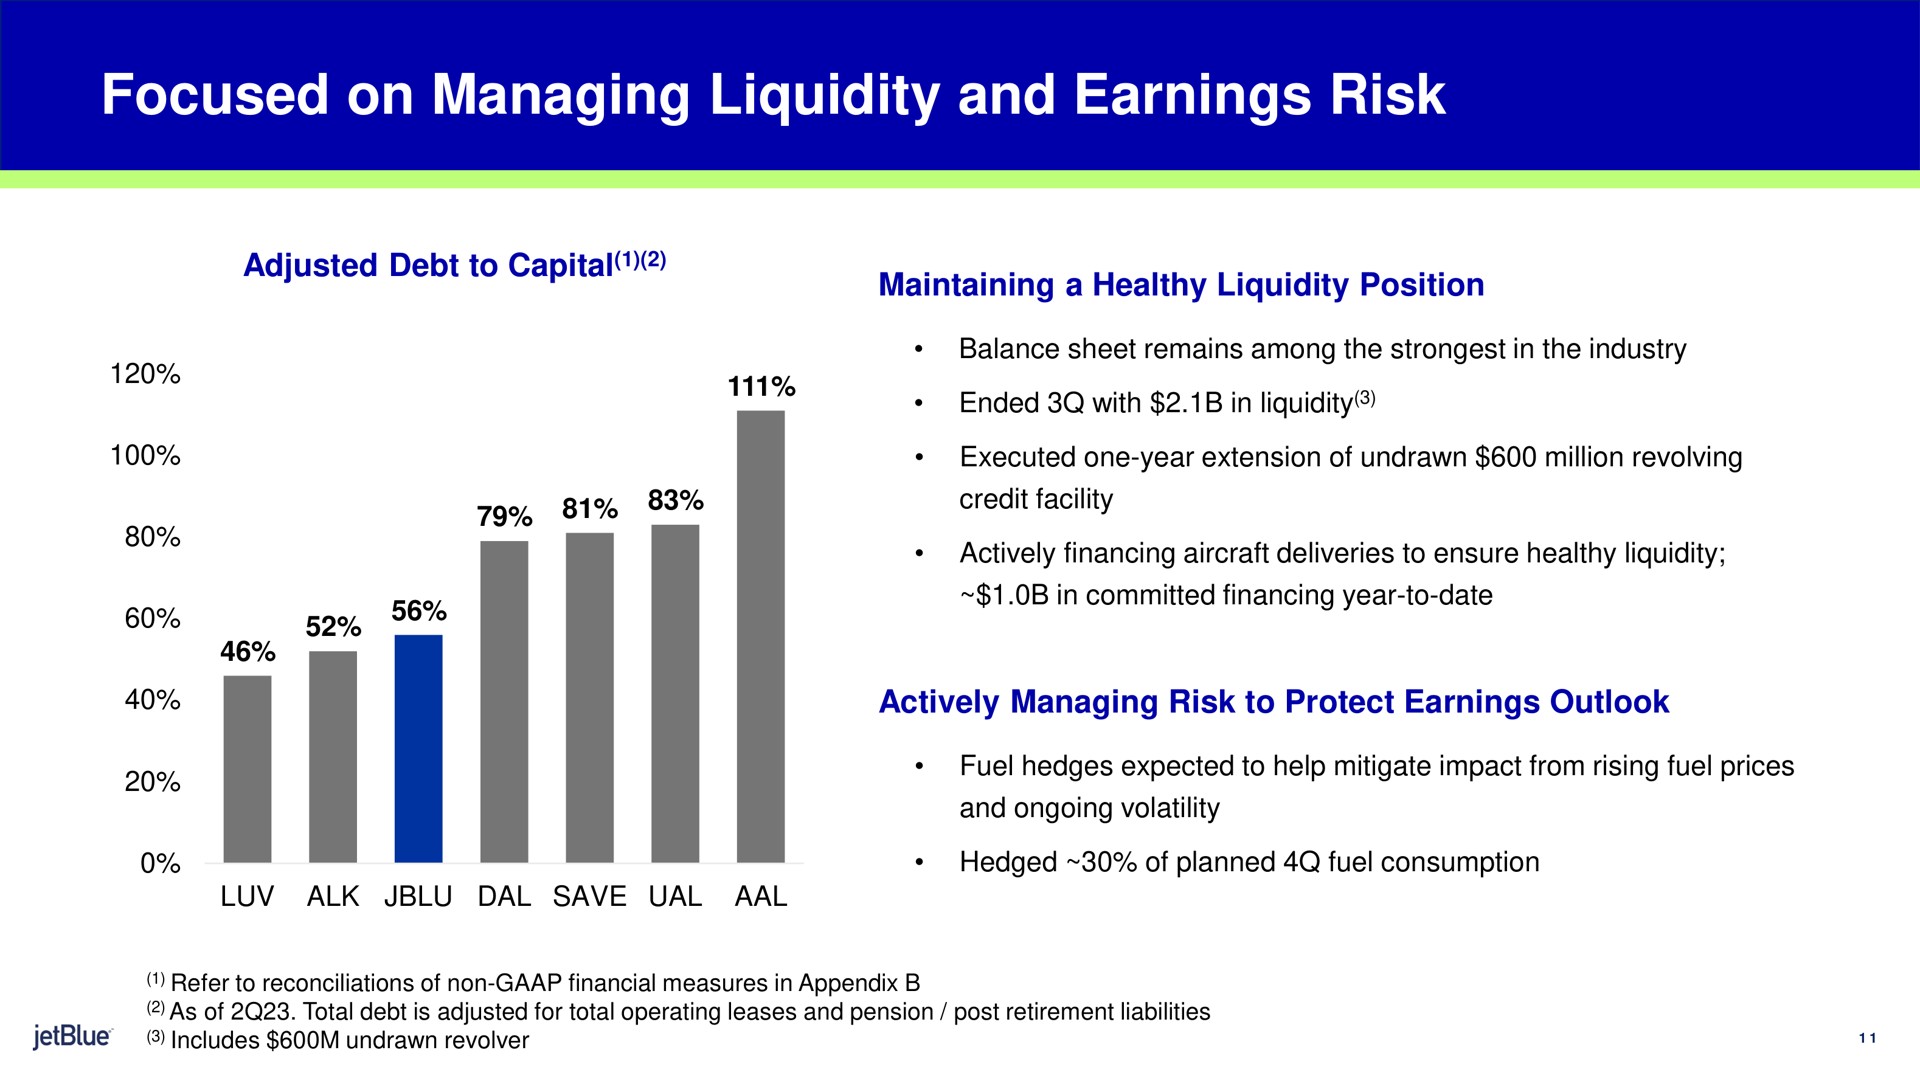 focused on managing liquidity and earnings risk adjusted debt to capital maintaining a healthy liquidity position actively managing risk to protect earnings outlook | jetBlue